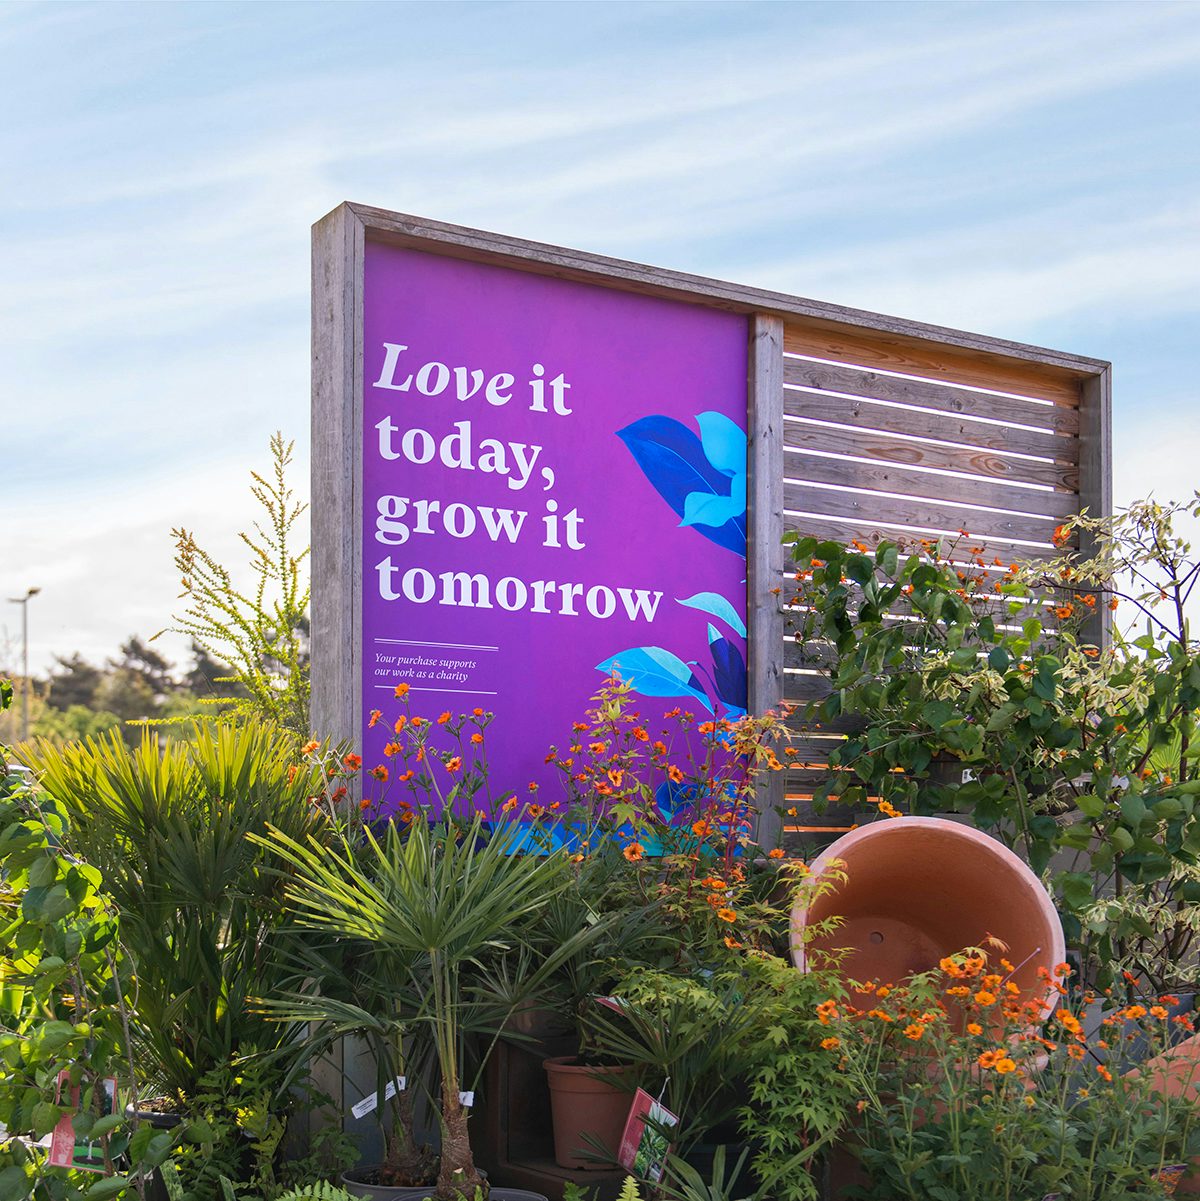 Photograph of RHS outdoor signage, which reads "Love it today, grow it tomorrow", featuring the new visual identity by Design Bridge